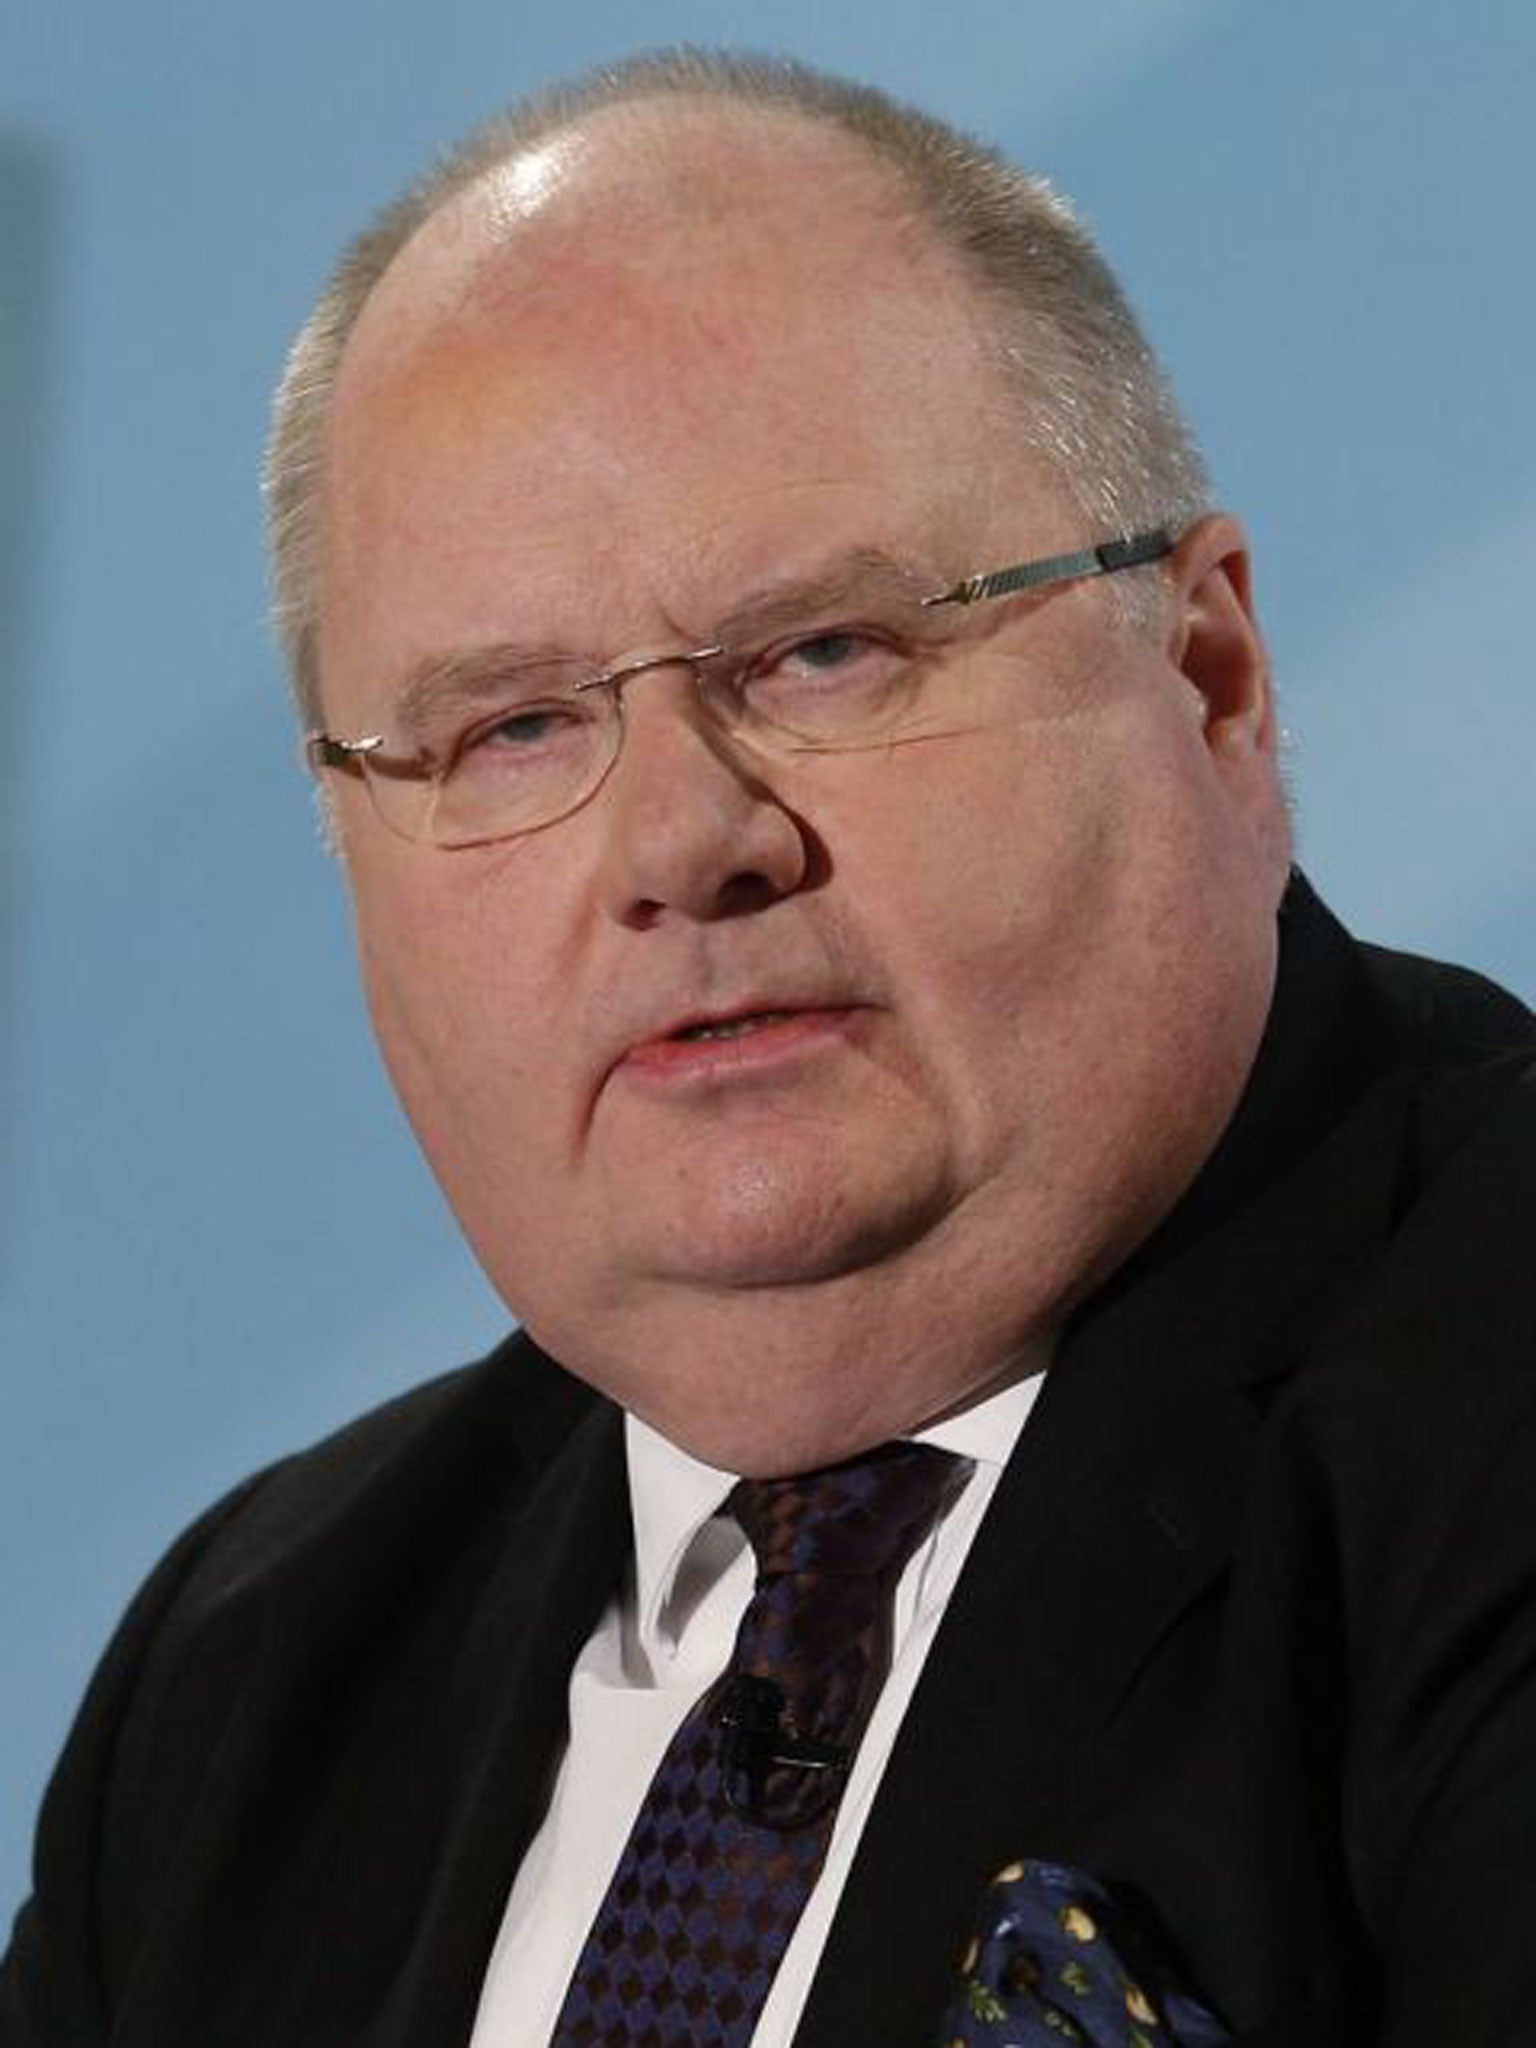 Local Government Secretary Eric Pickles has vowed to clamp down on a "back door parking tax" that would force residents to seek planning permission to rent out their drive ways